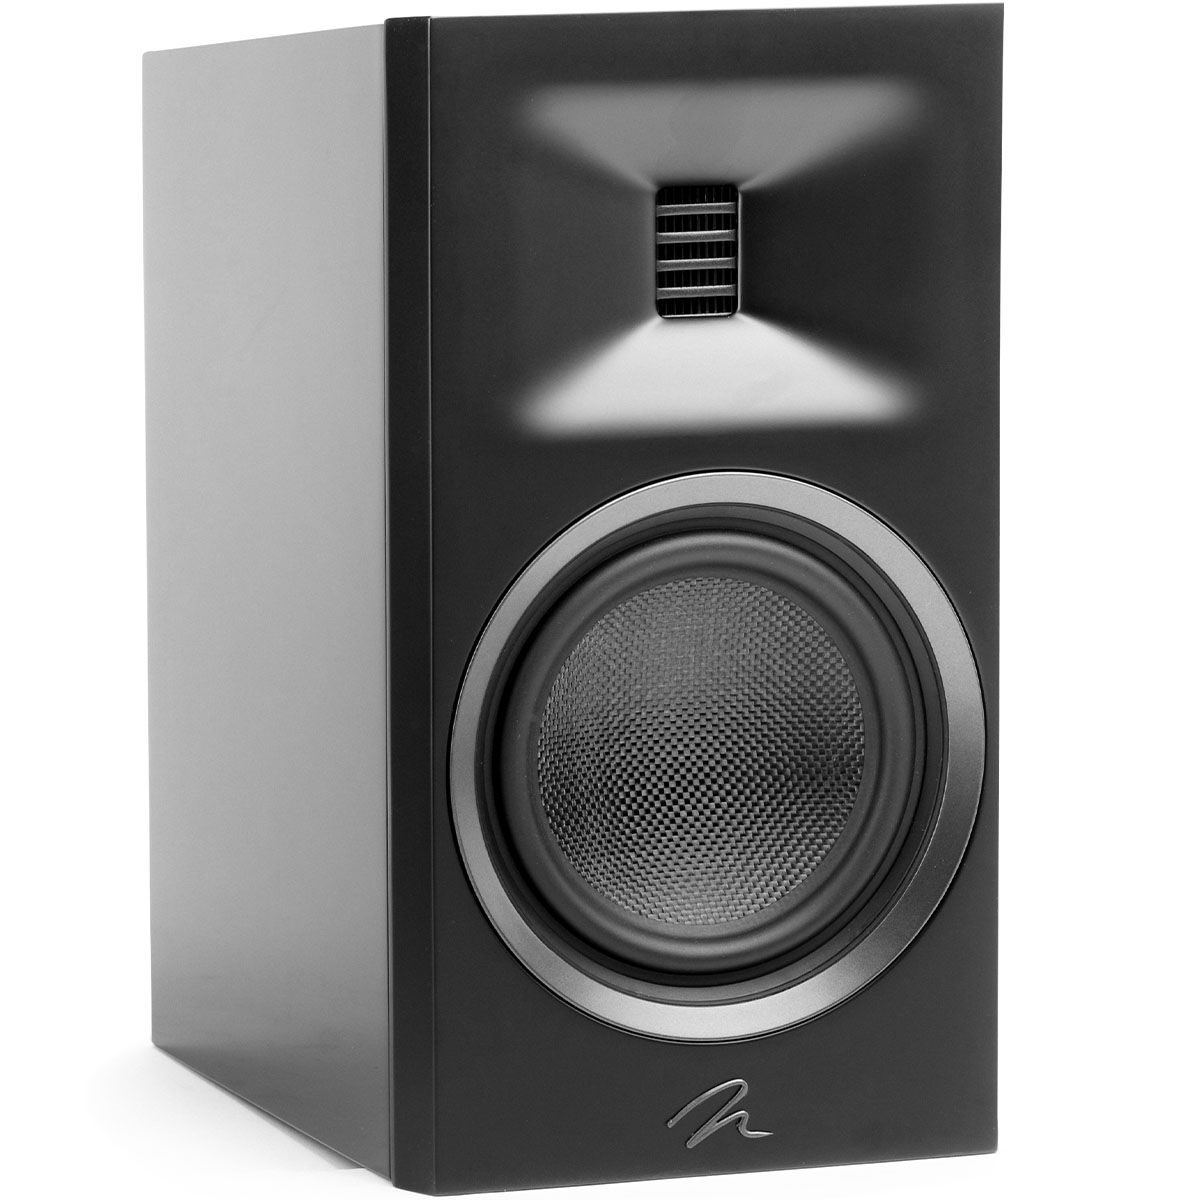 MartinLogan Motion XT B10  Bookshelf Speaker in black, angled view without grilles on white background